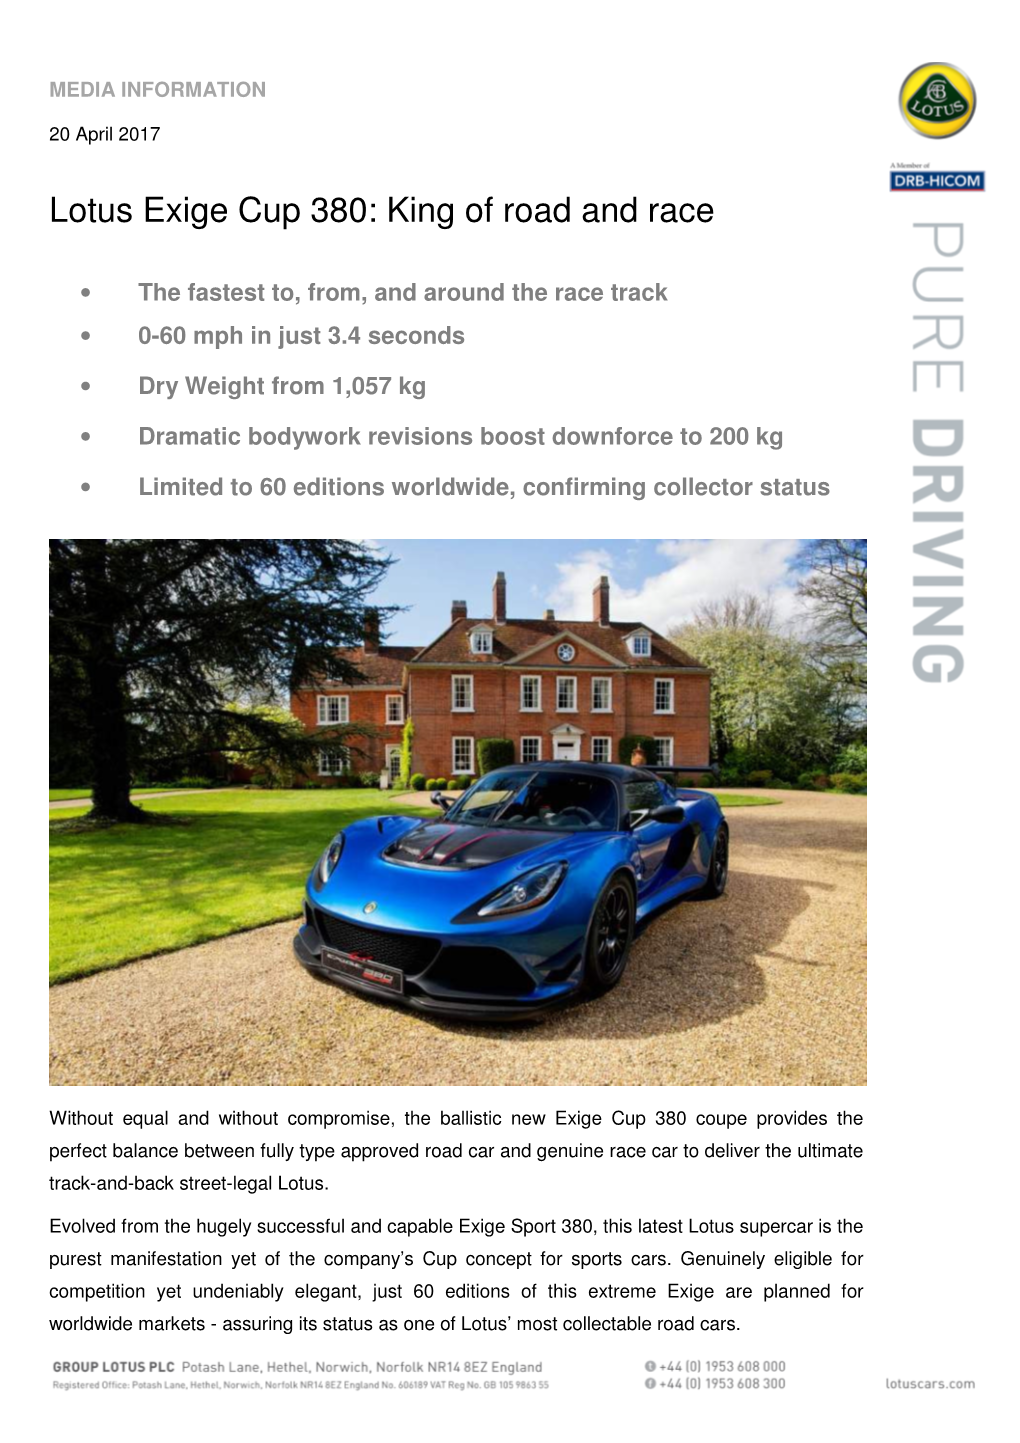 Lotus Exige Cup 380: King of Road and Race